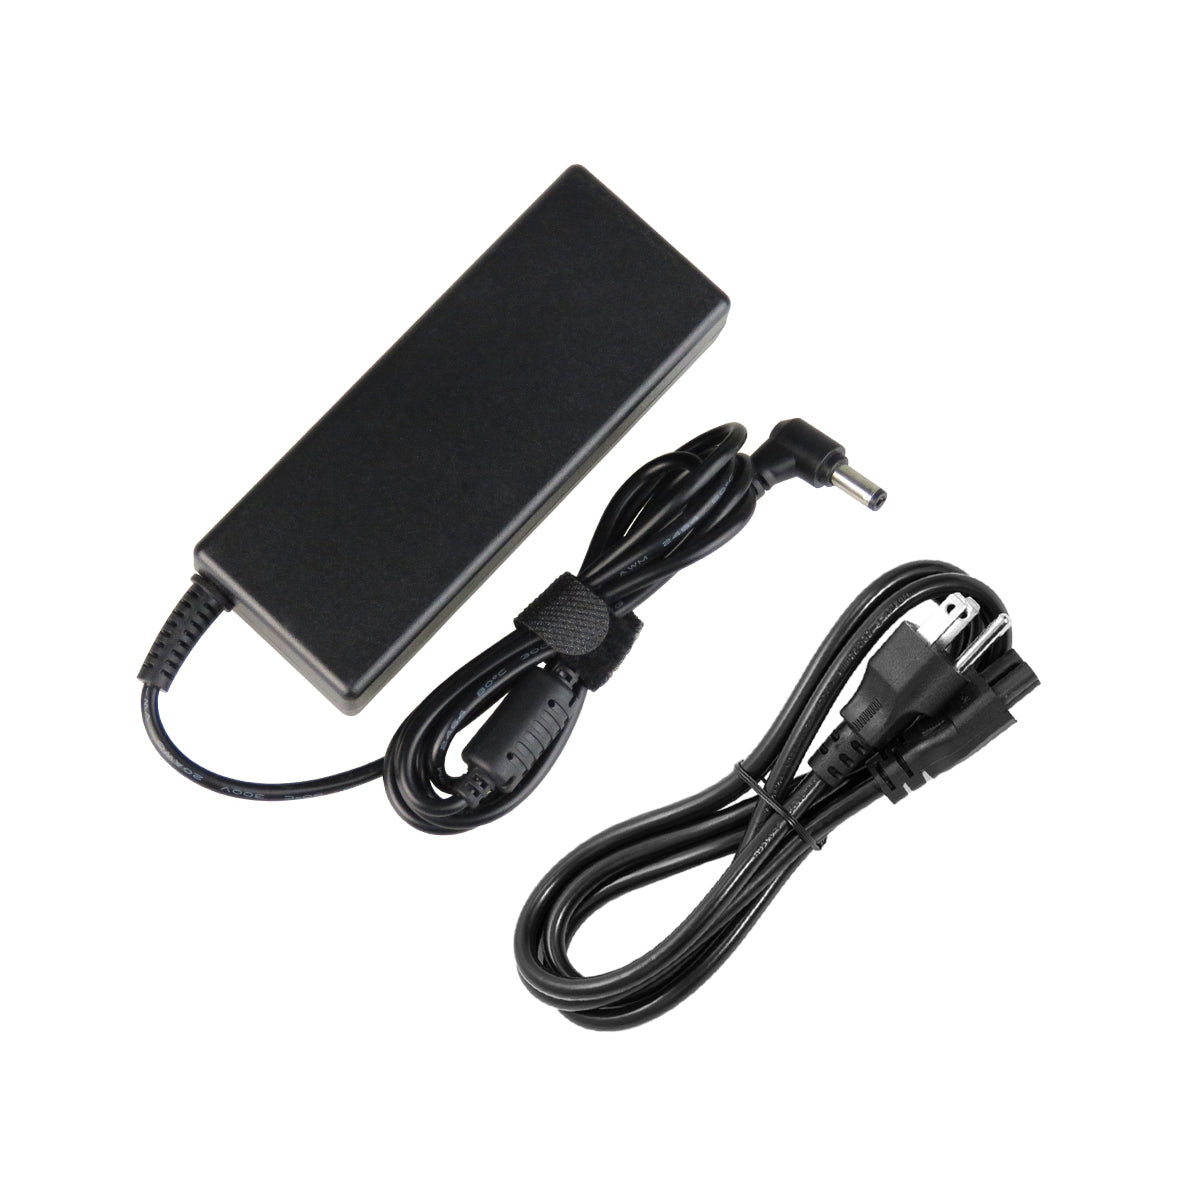 AC Adapter Charger for ASUS A53 Notebook.